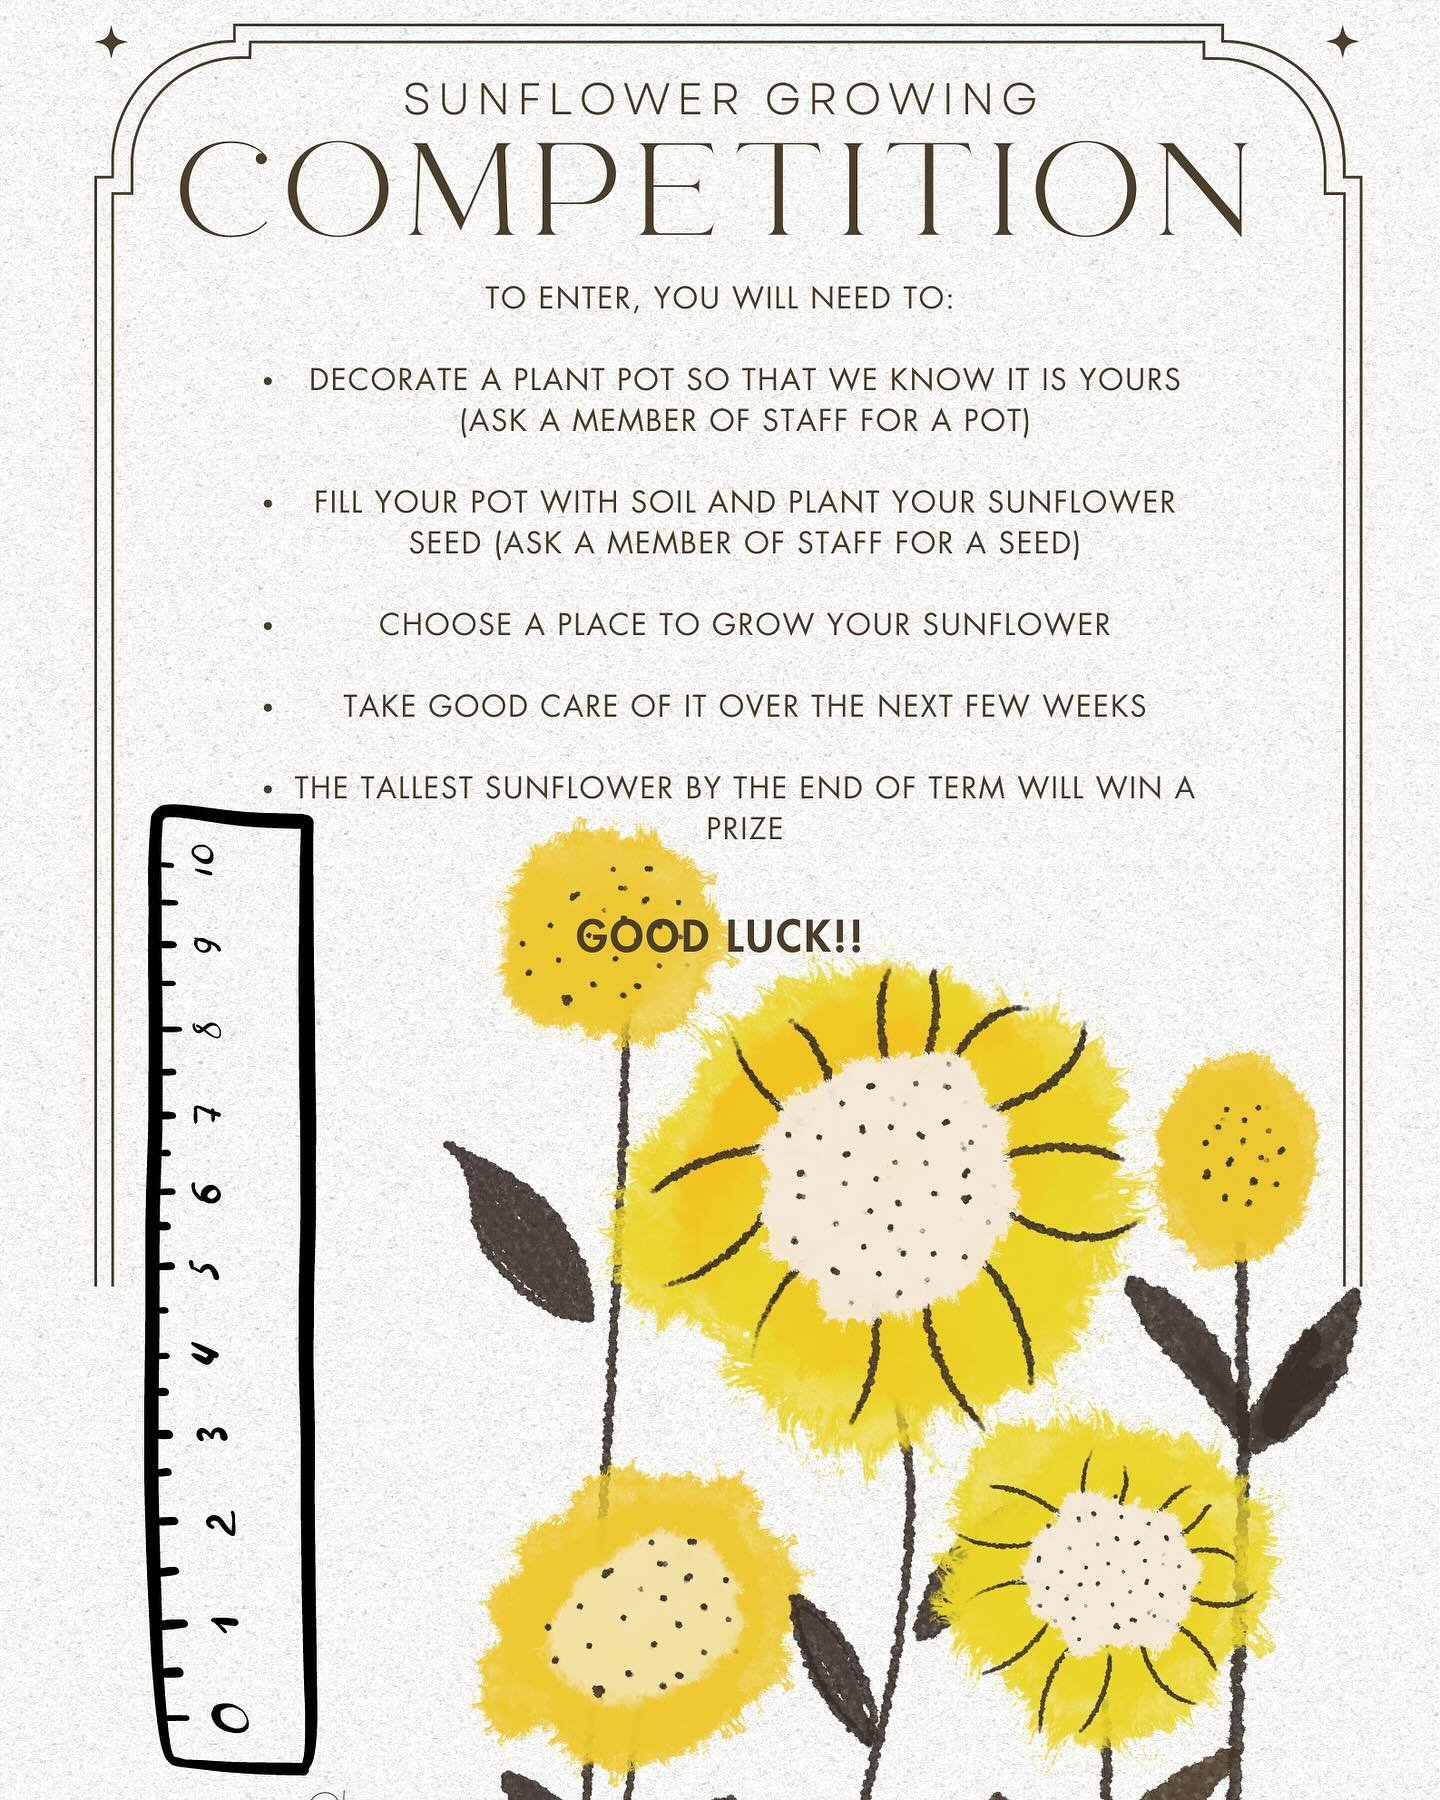 We have our very own sunflower growing competition this year for all staff and students to take part in. And we have life already! If you&rsquo;ve not yet planted your seed, there&rsquo;s still time! A prize will be awarded to the tallest sunflower. 